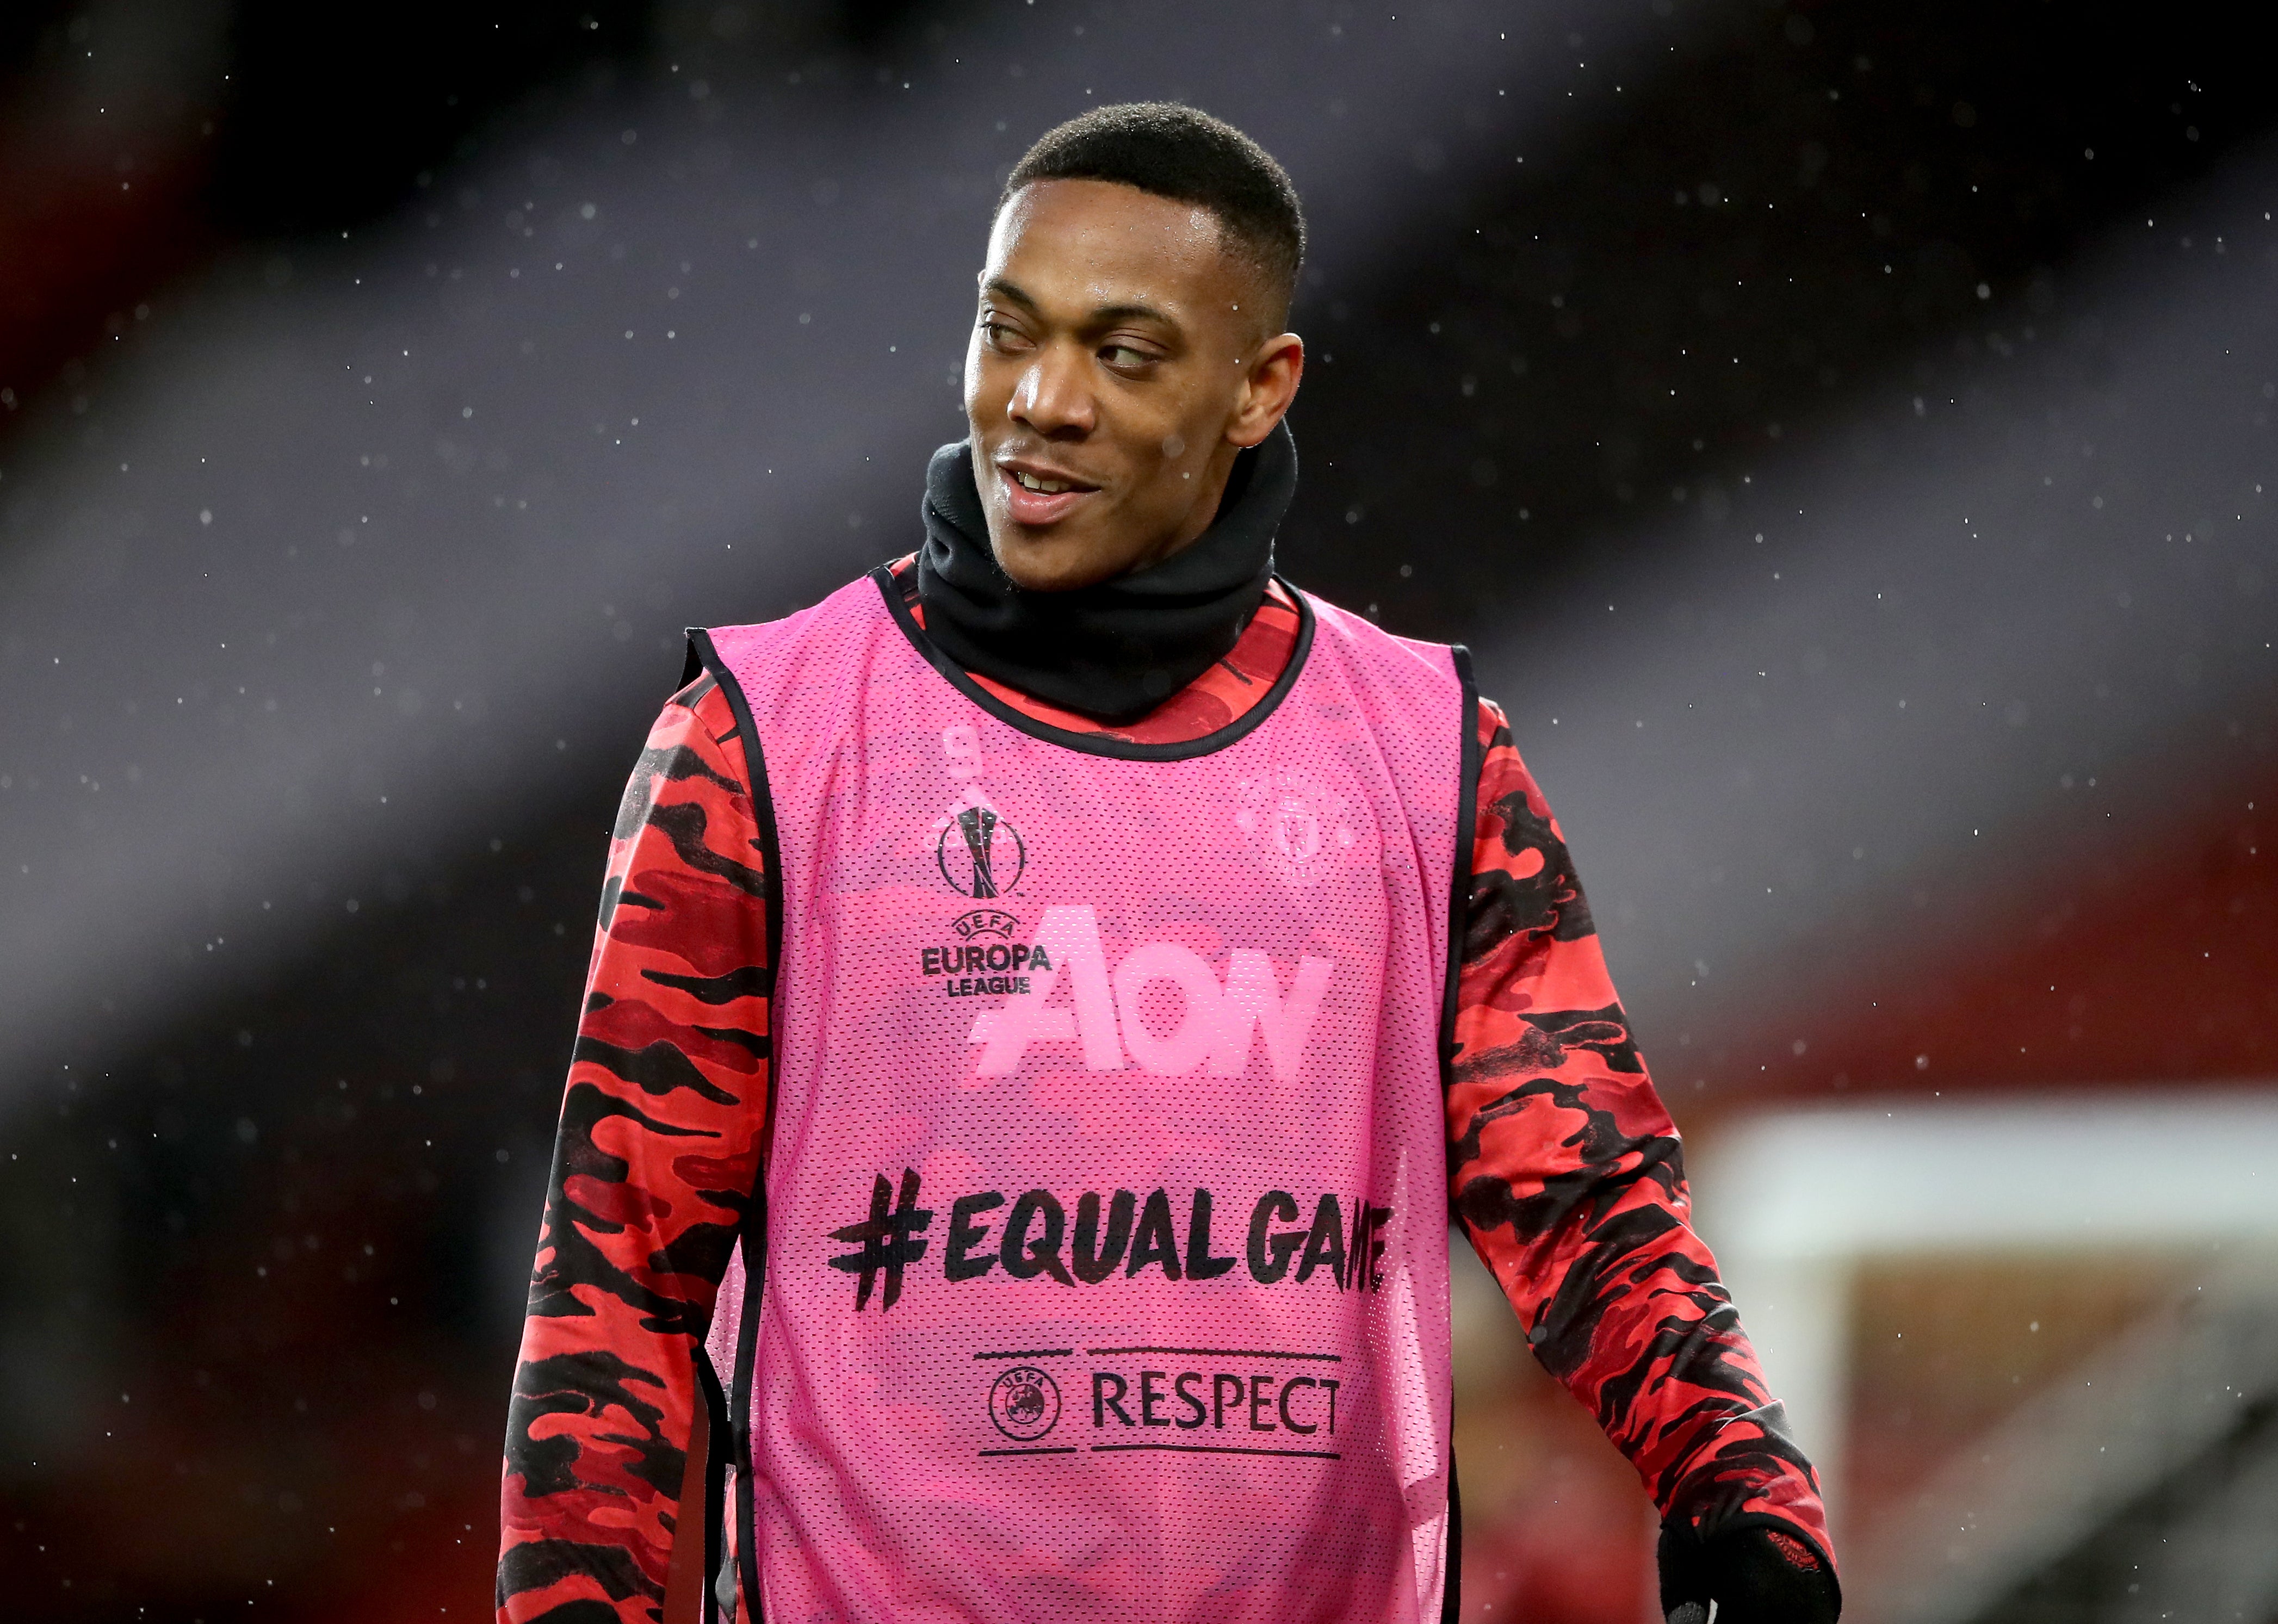 Martial’s agent made comments over the weekend about his client seeking a move away from Old Trafford